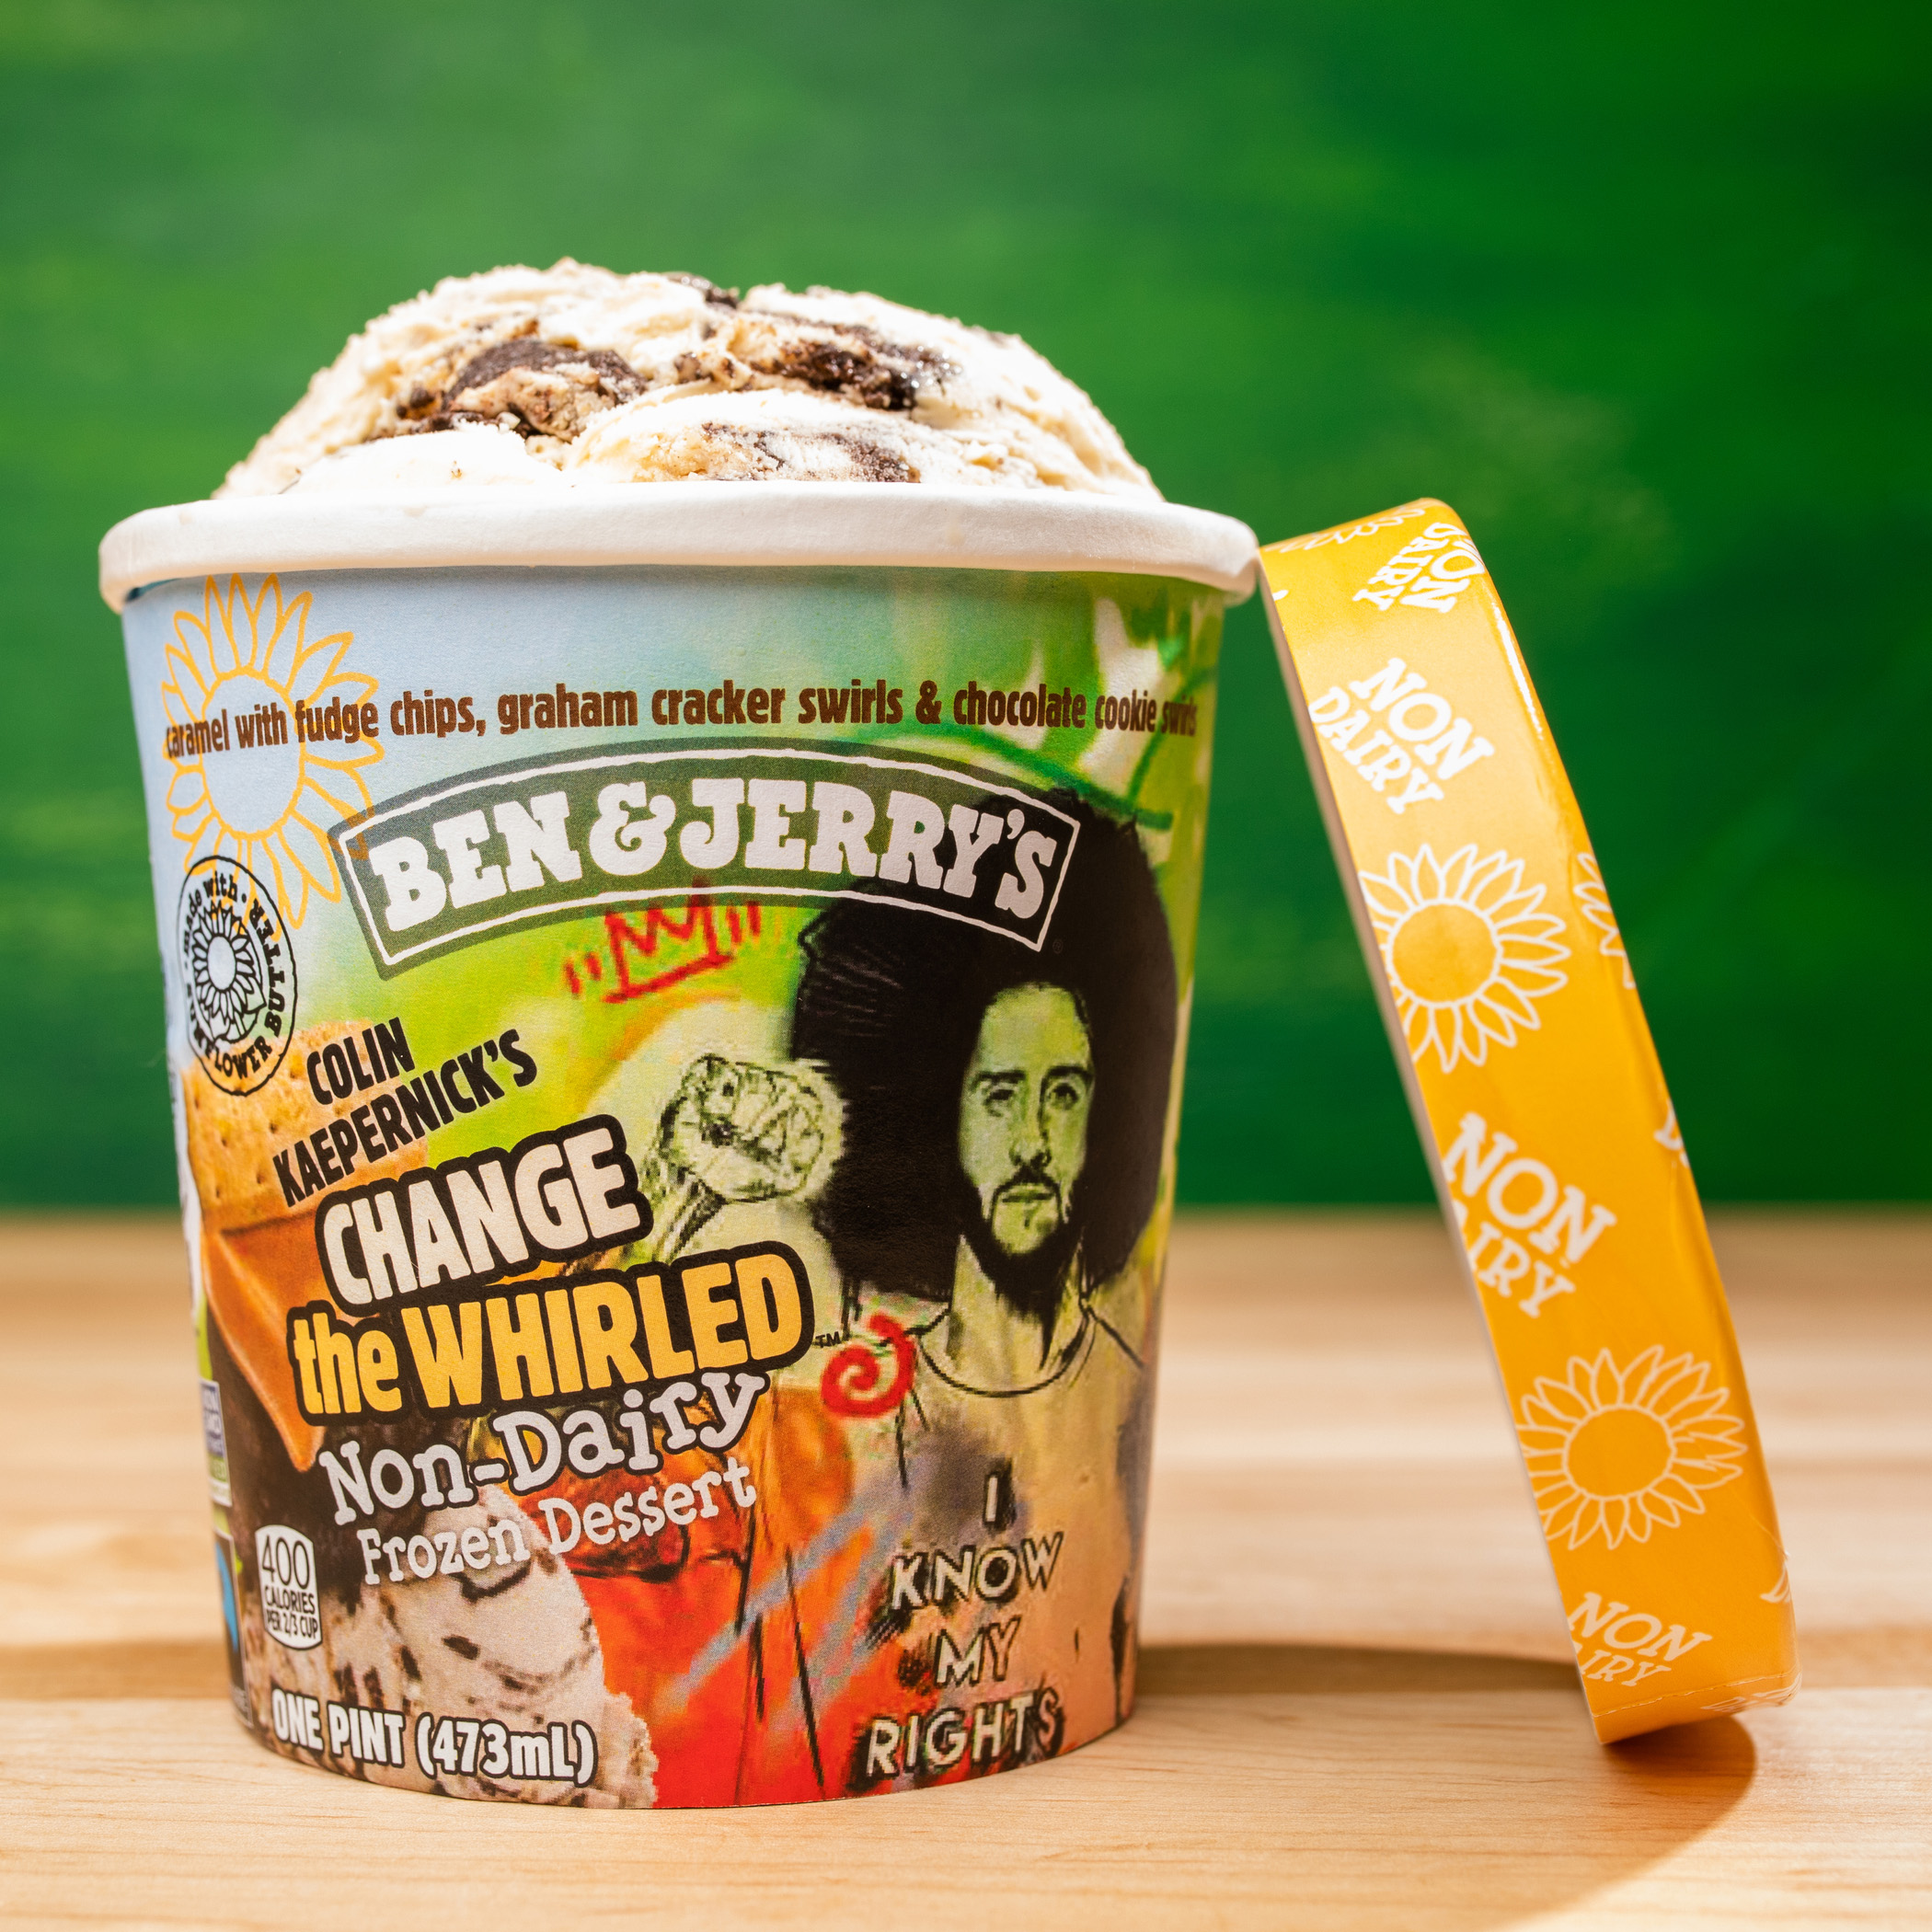 Ben & Jerry’s new Change the Whirled flavor honors Colin Kaepernick’s activism work